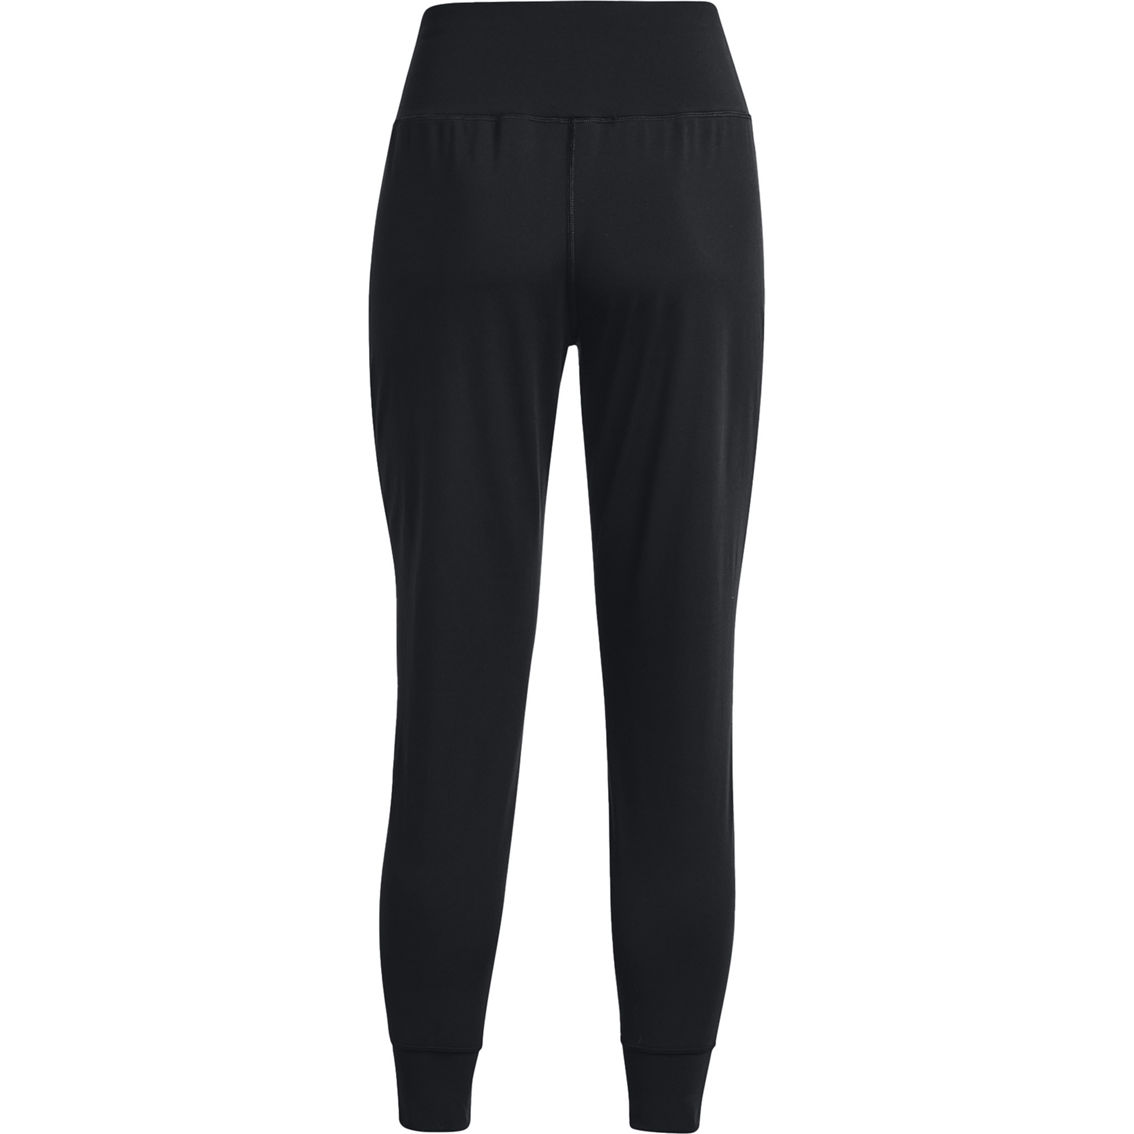 Under Armour UA Motion Jogger Pants - Image 4 of 6